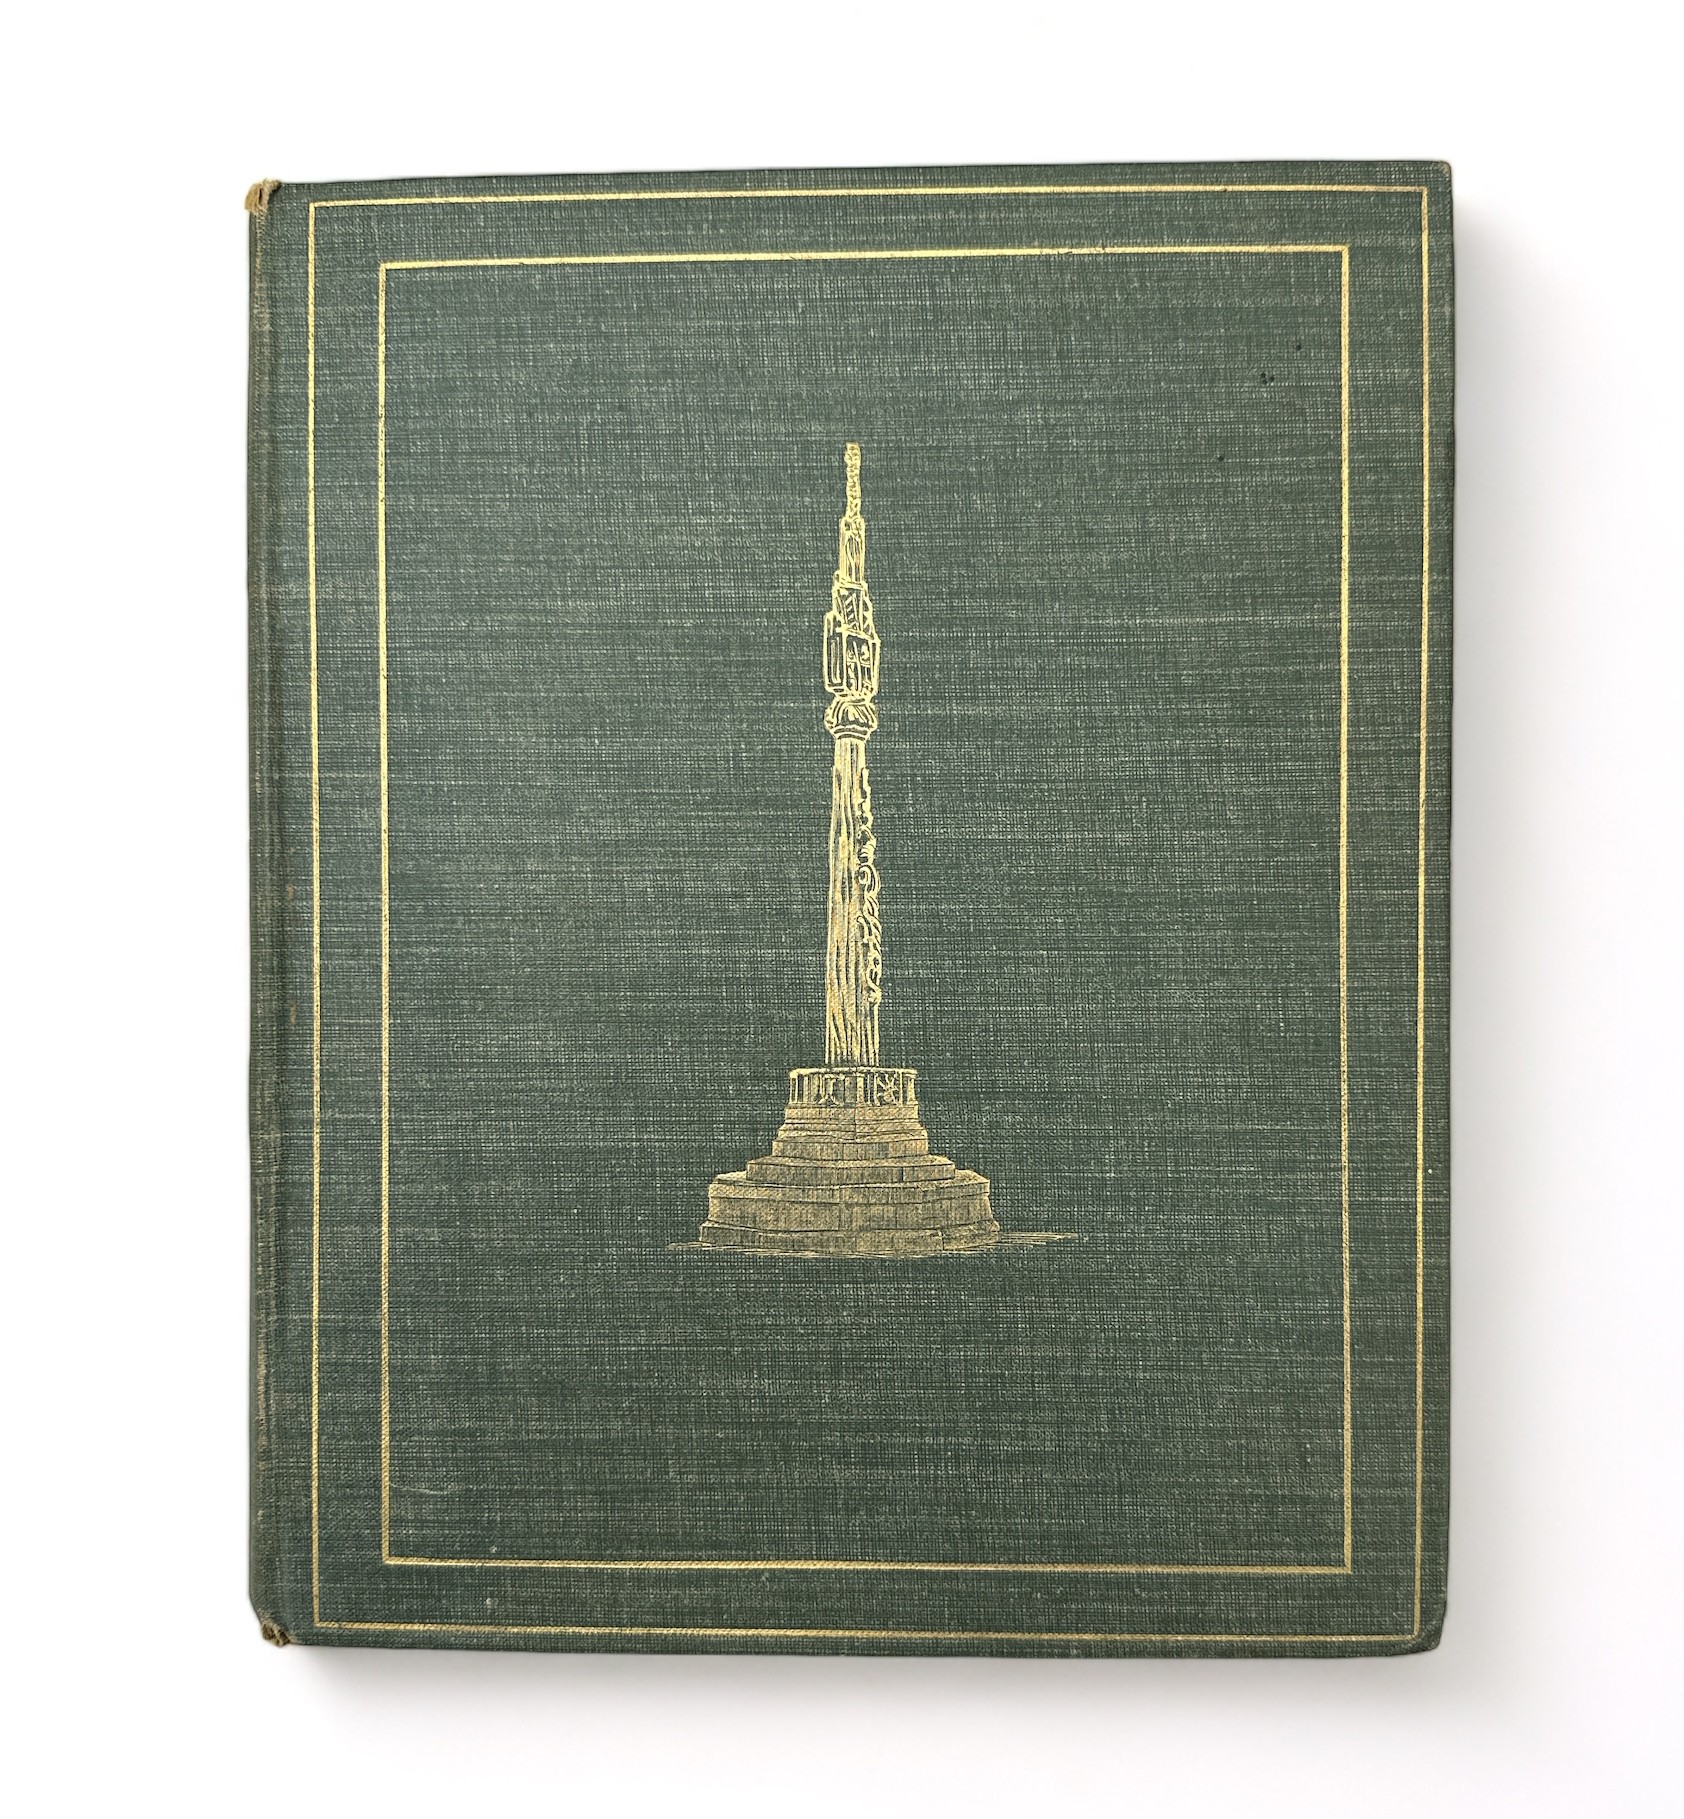 POPE, ALFRED. ‘ The Old Stone Crosses of Dorset ‘ by Alfred Pope. With an introduction and - Image 2 of 3